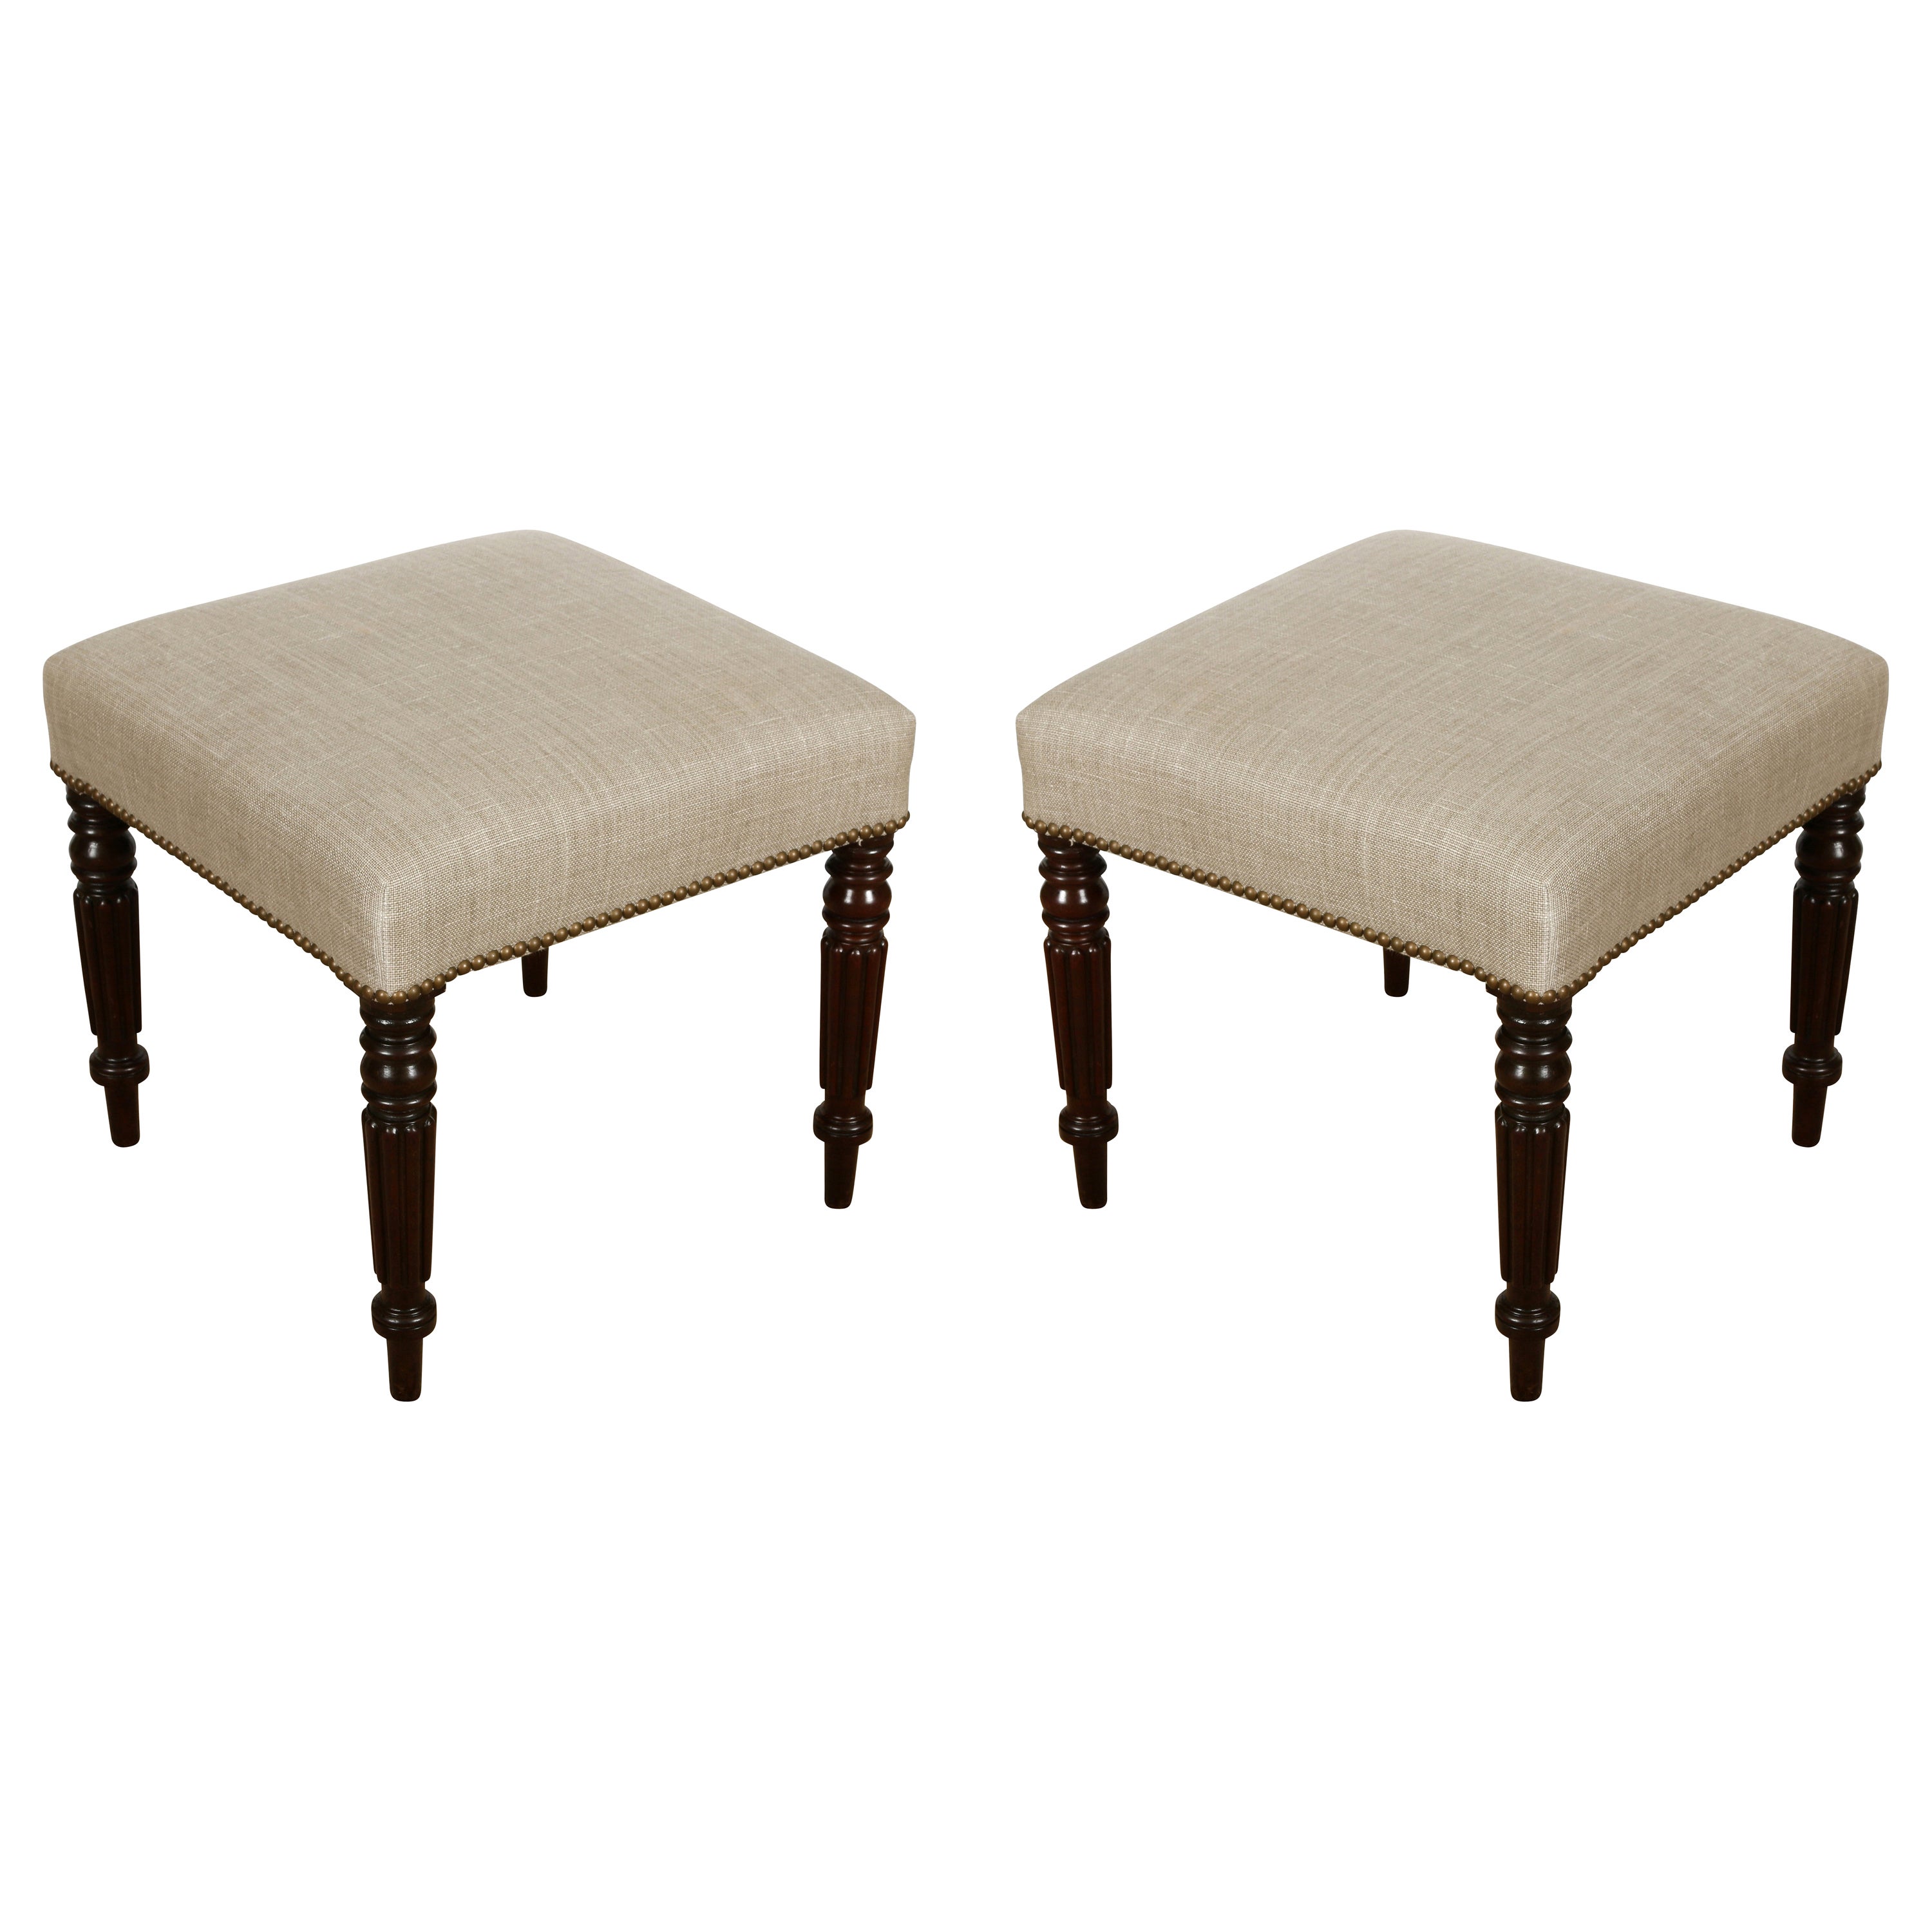 Pair of English Upholstered Stools